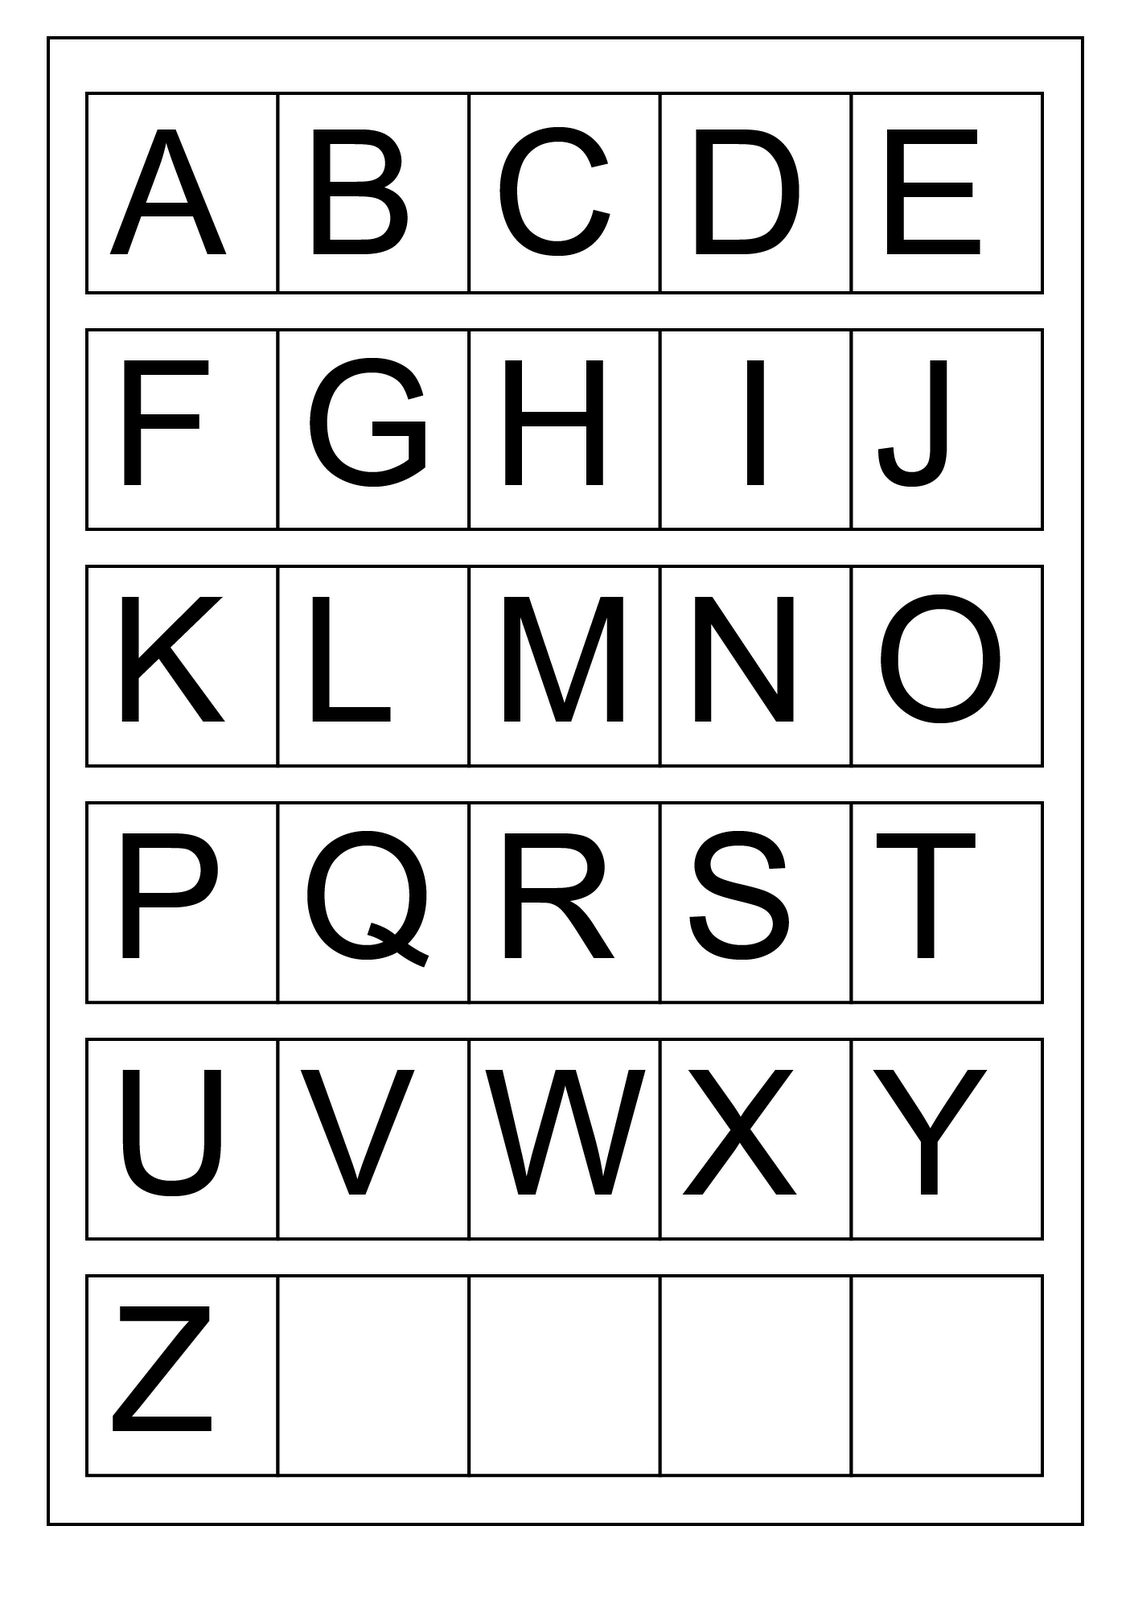 Capital Alphabet Letters Chart In 2021 | Capital Letters